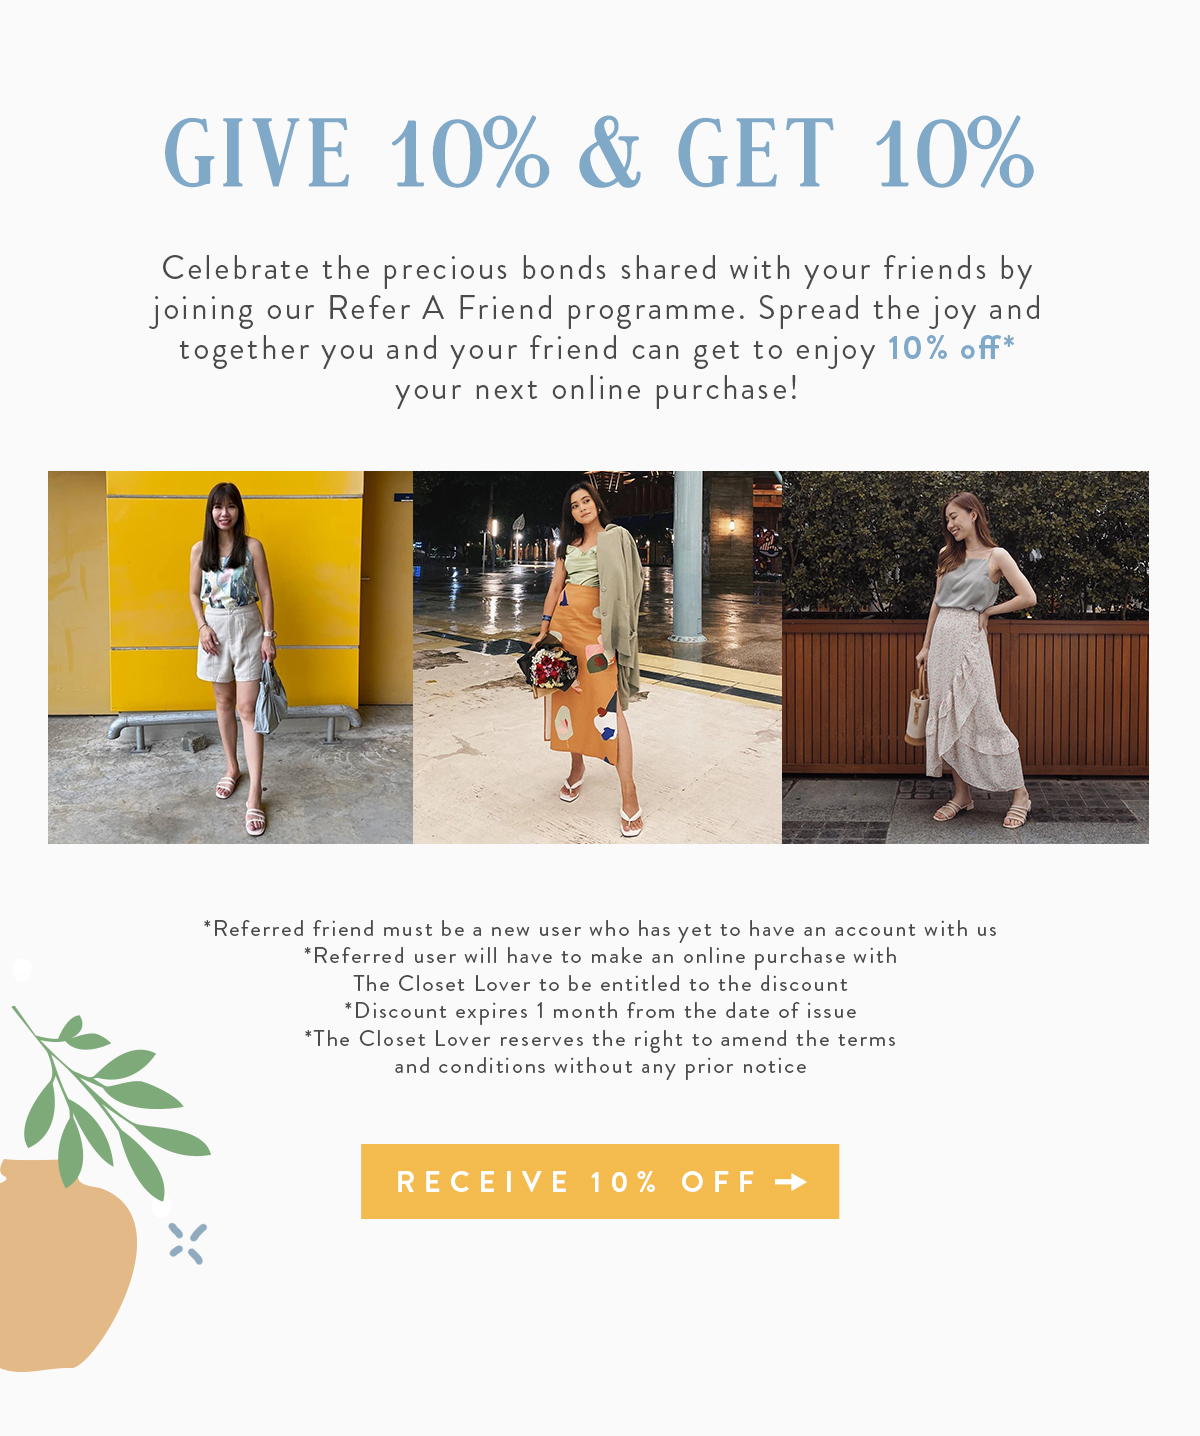 Give 10% And Get 10%